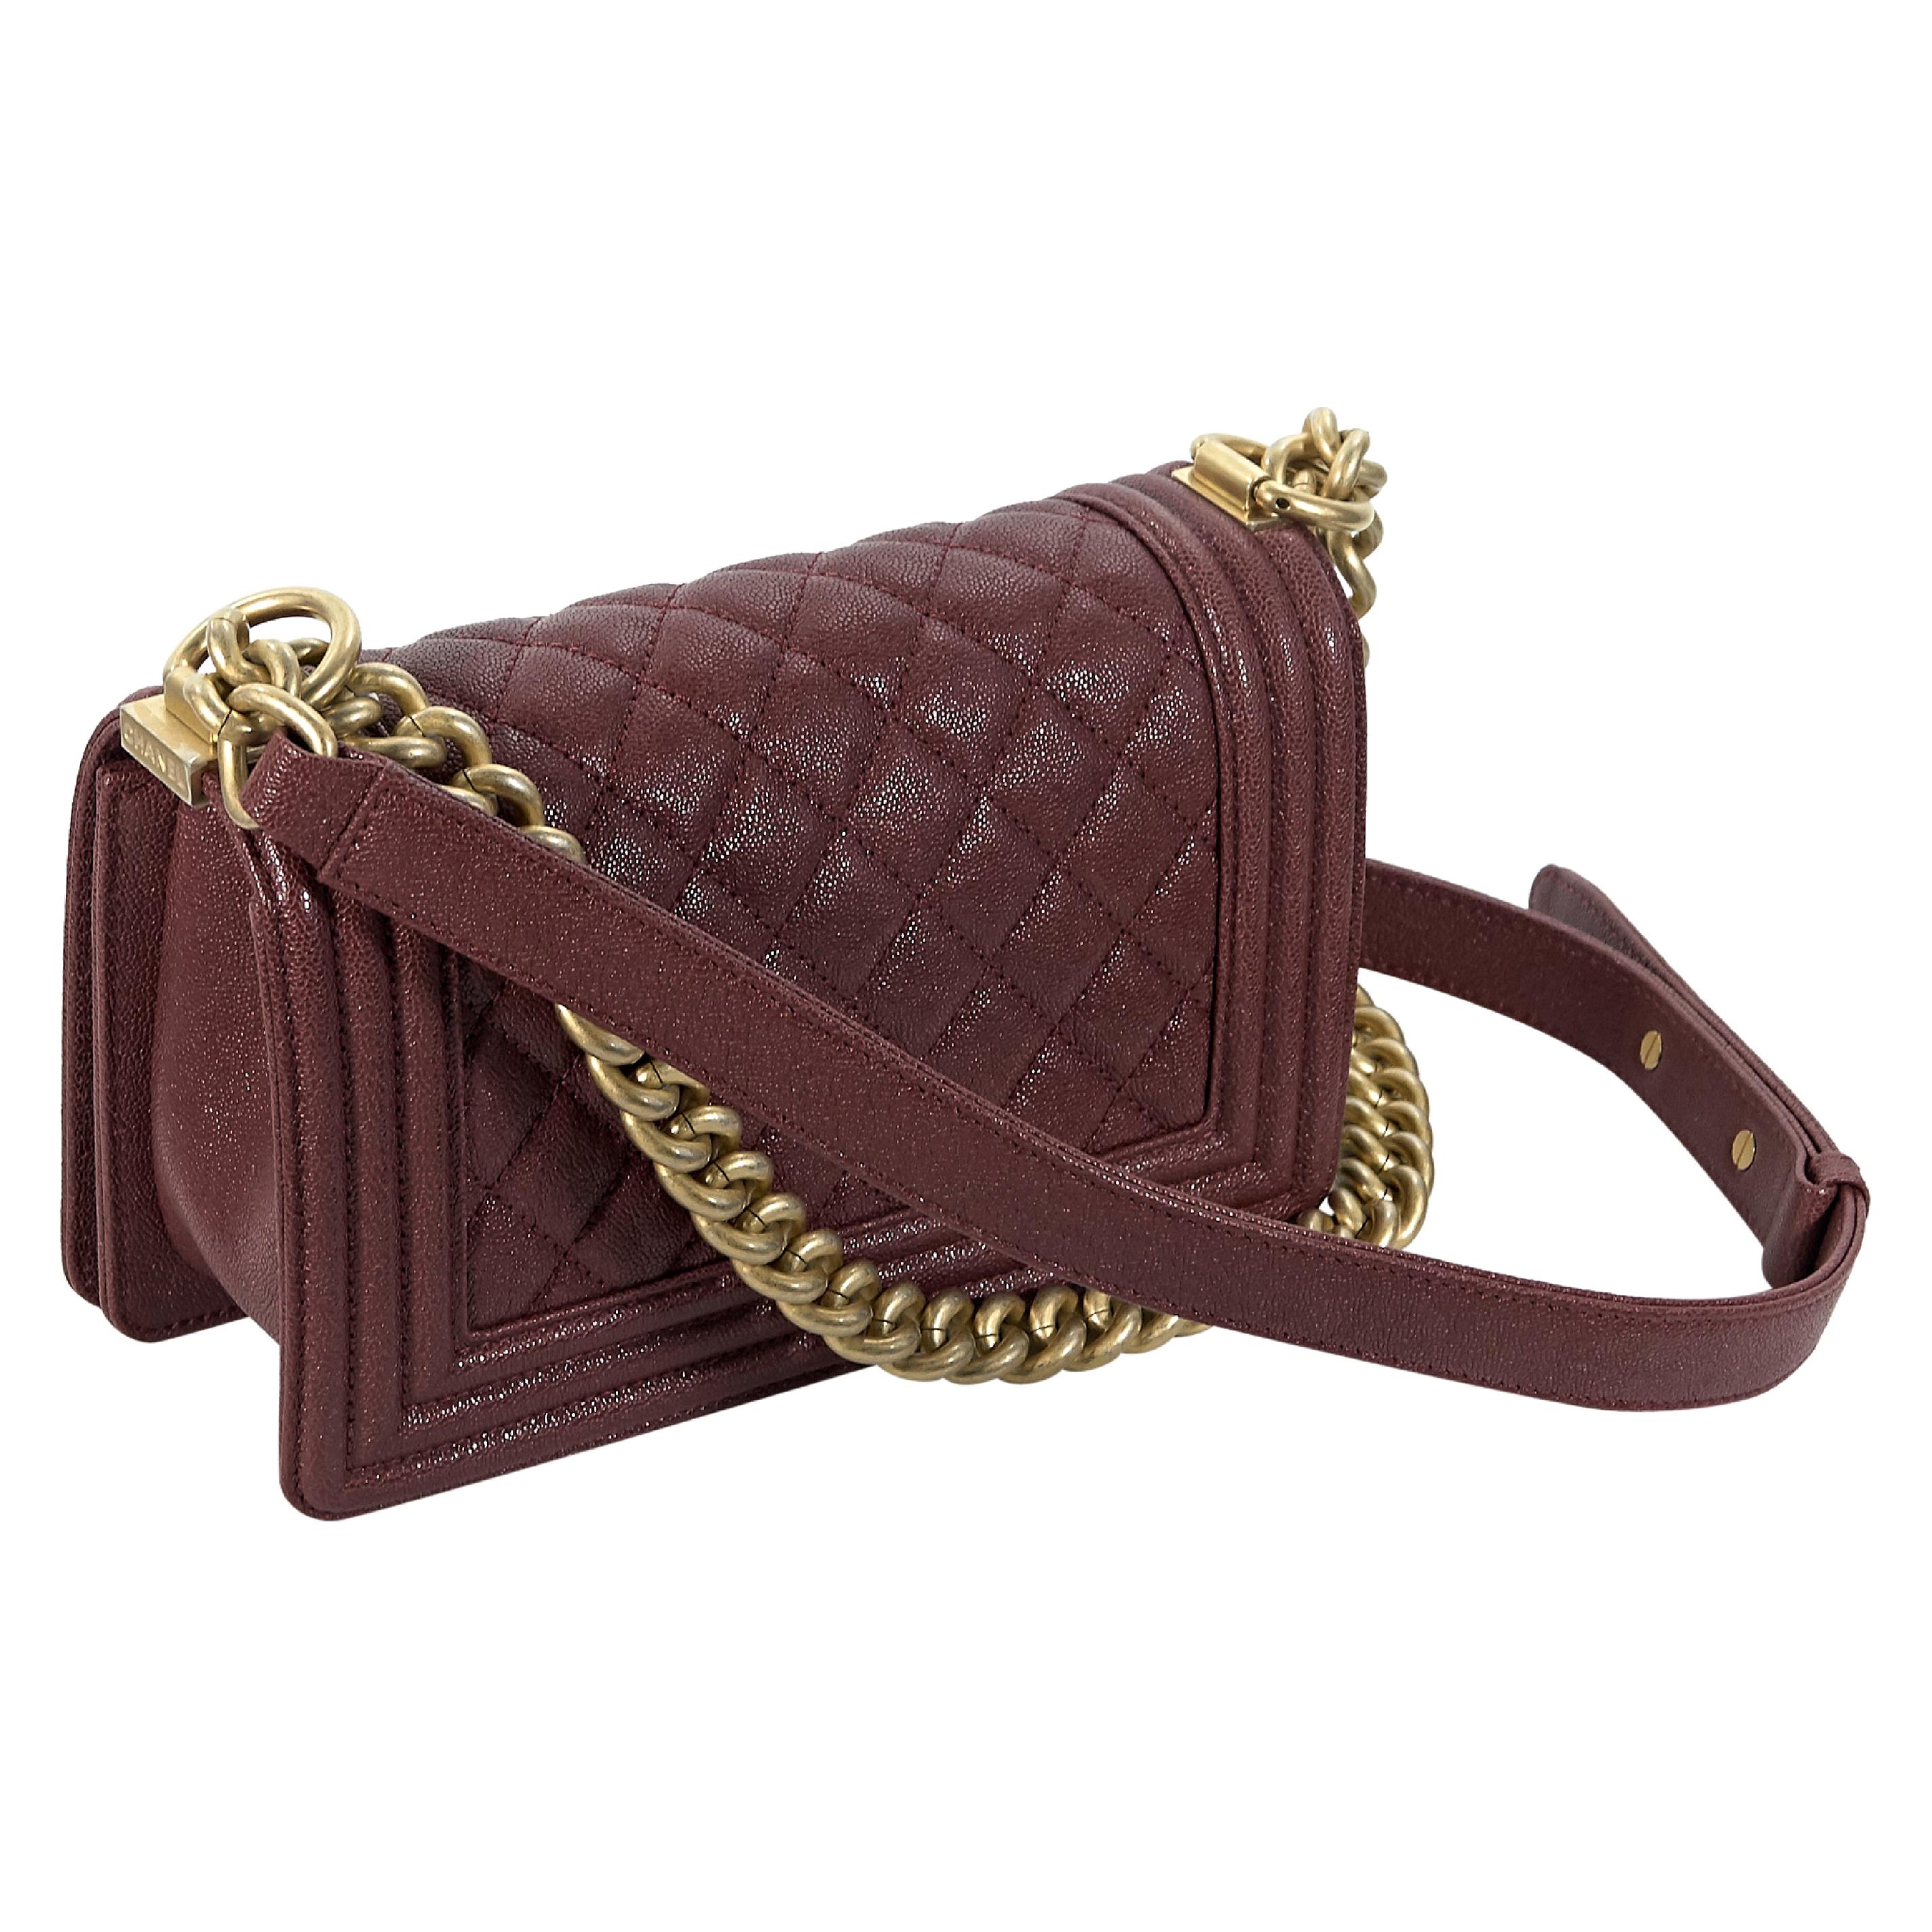 Burgundy Chanel Quilted Leather Boy Bag